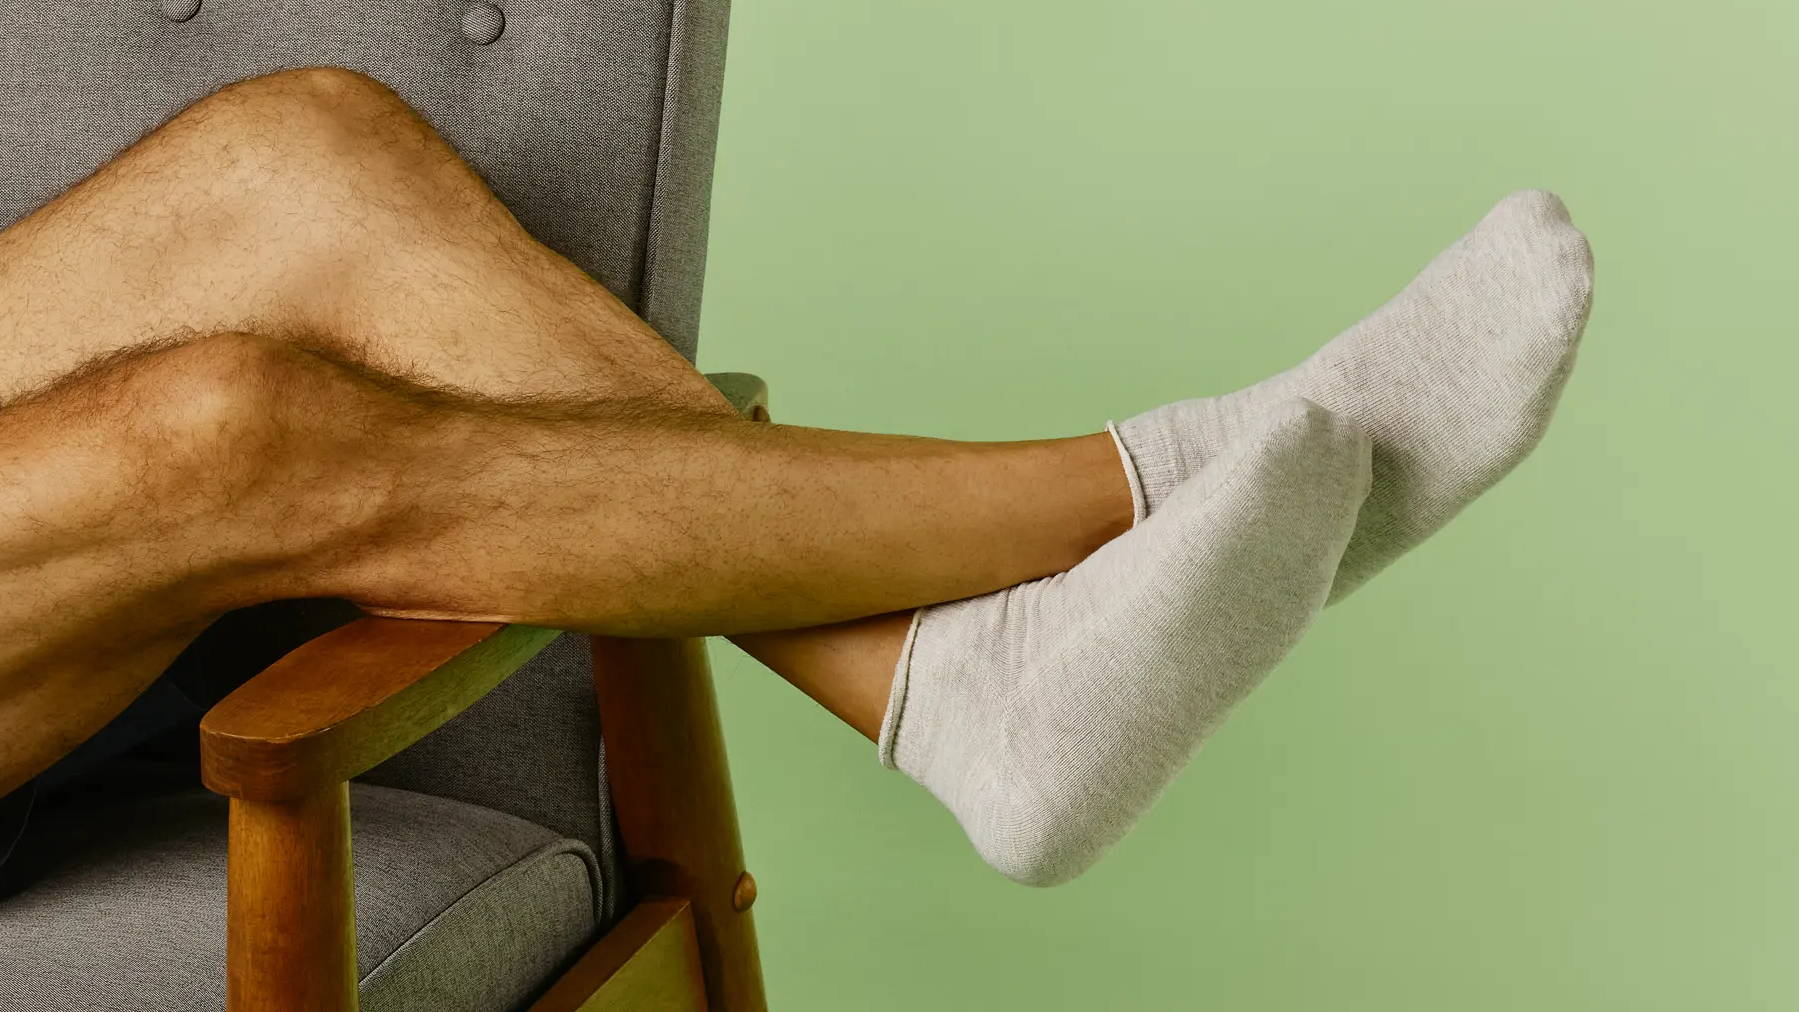 Man lounging on chair while wearing SmartKnit Seamless Socks